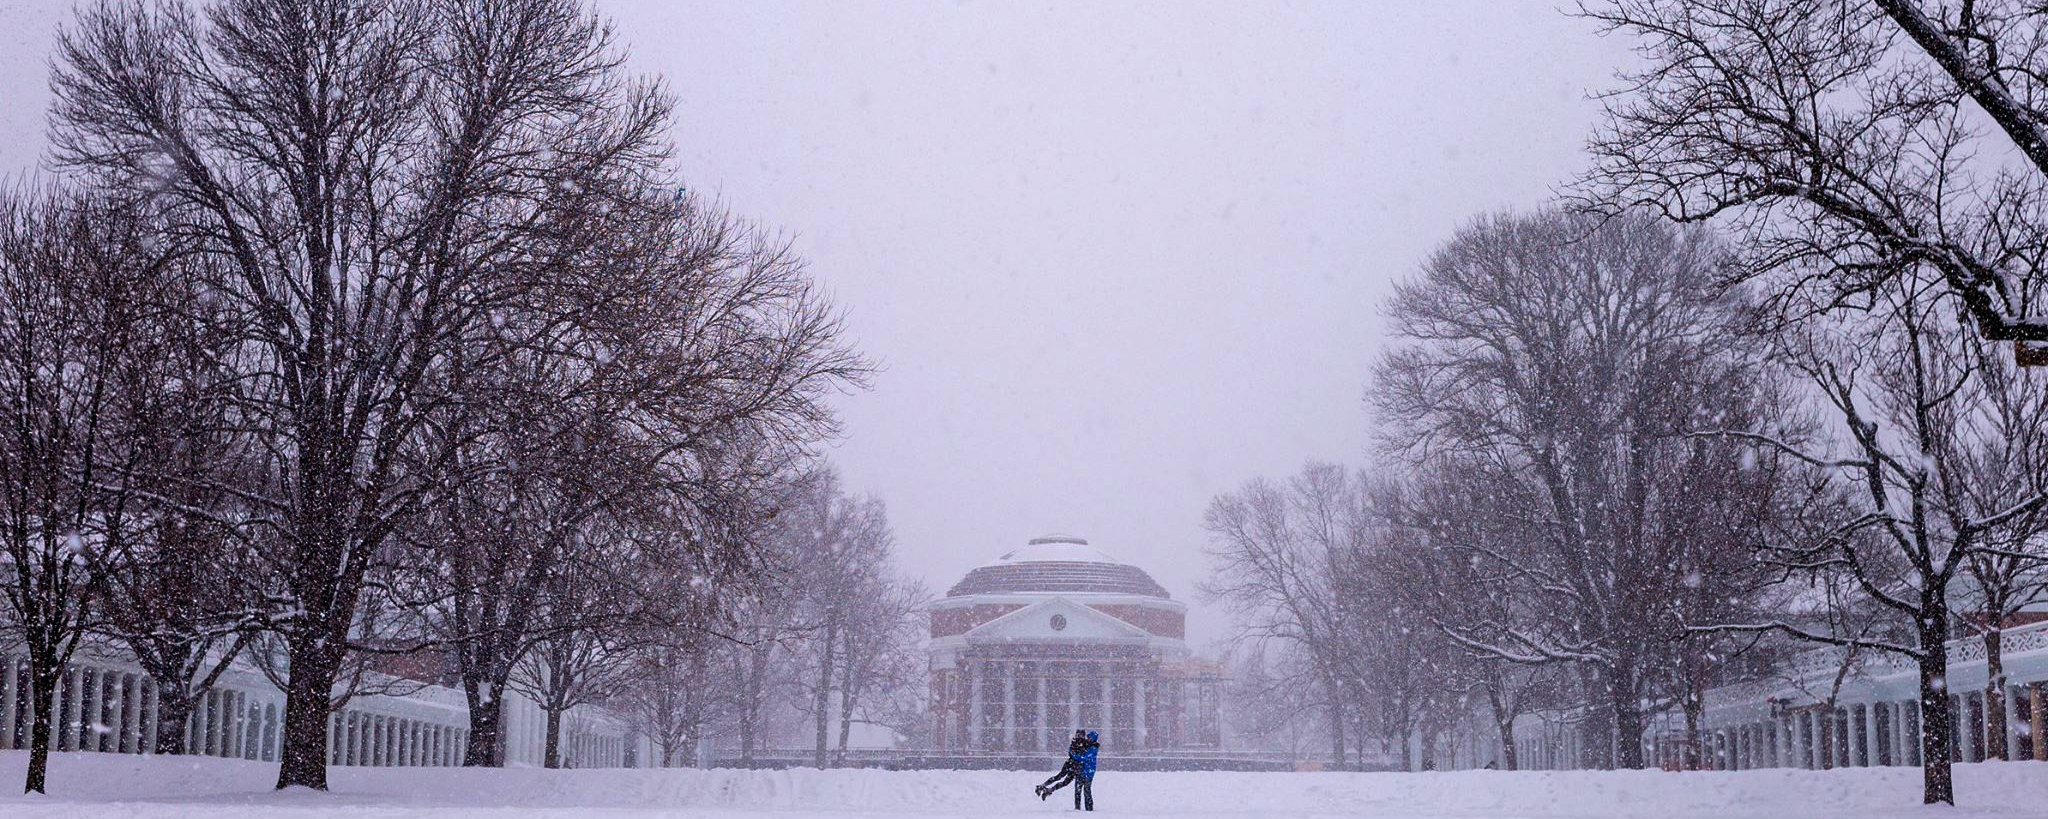 The Rotunda in the snow with two people playing on the lawn